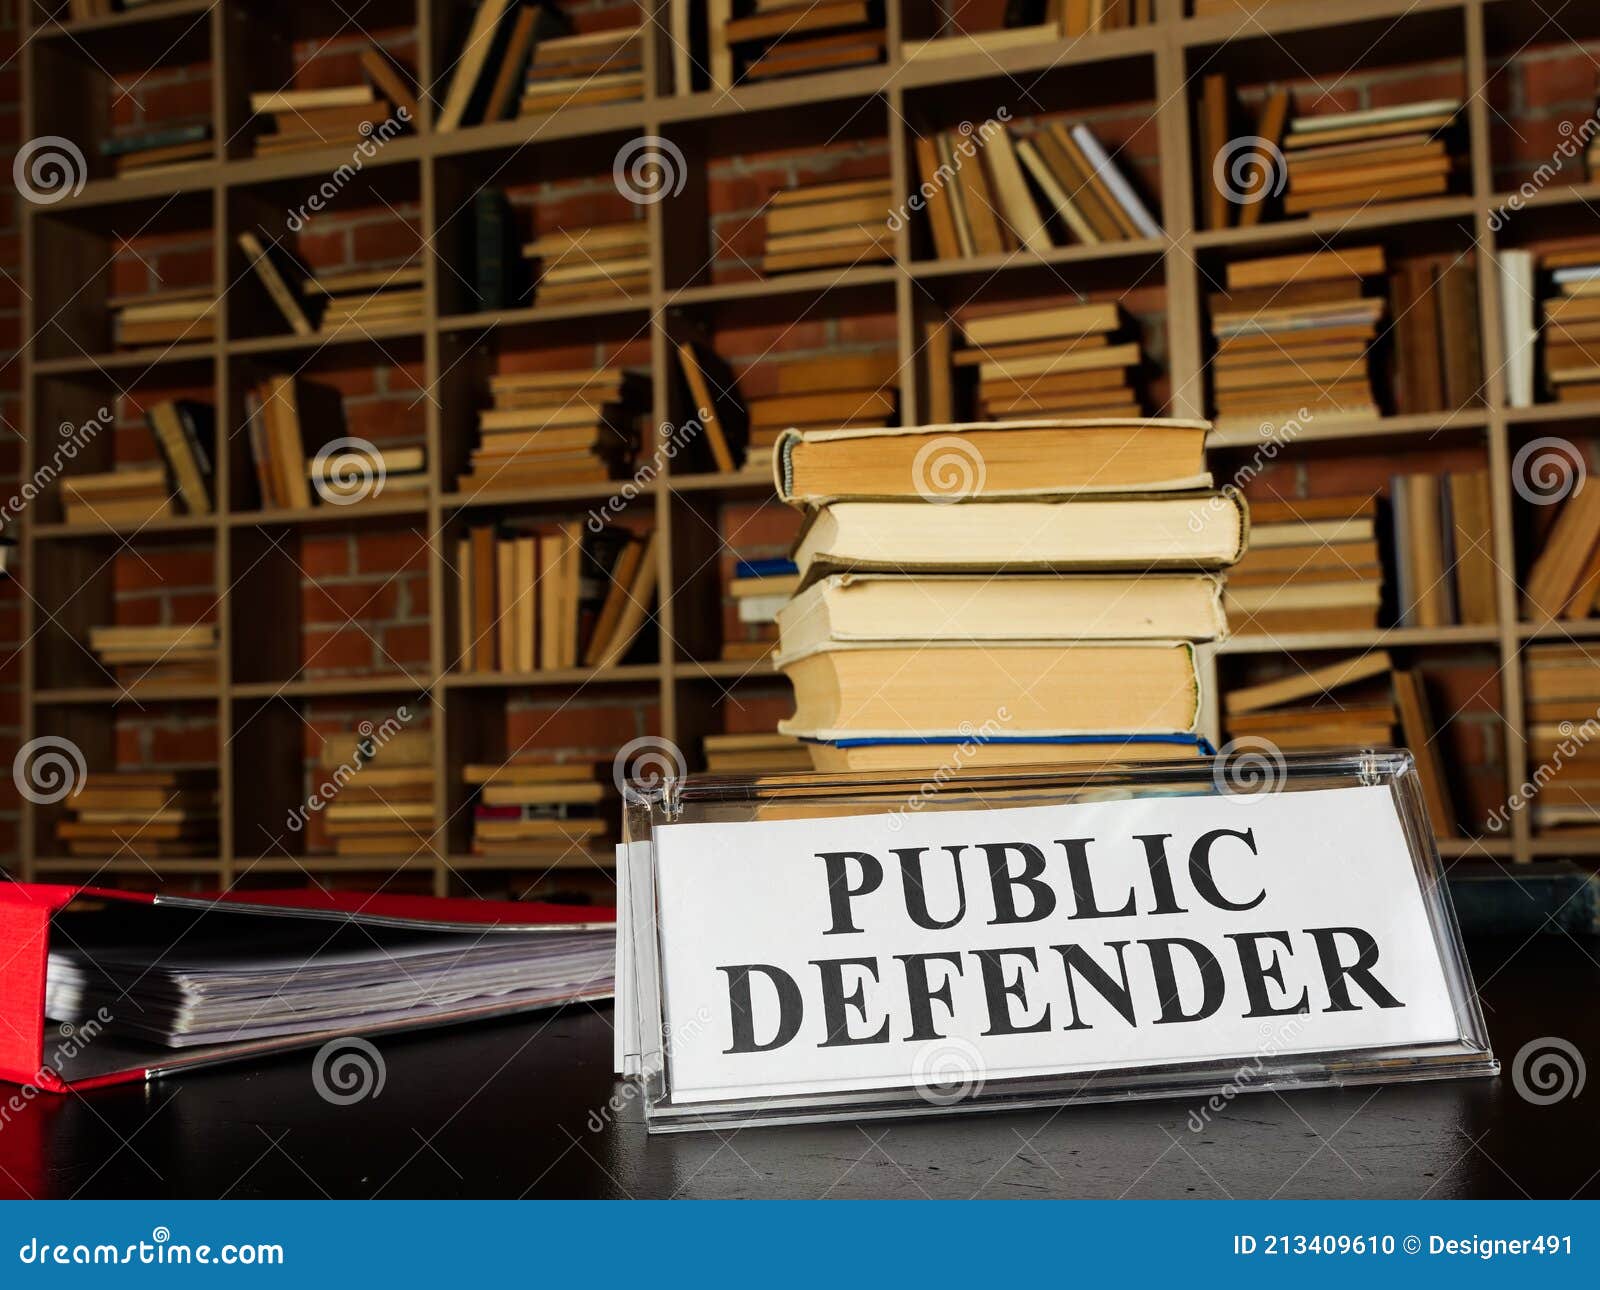 nameplate public defender and stack of book.